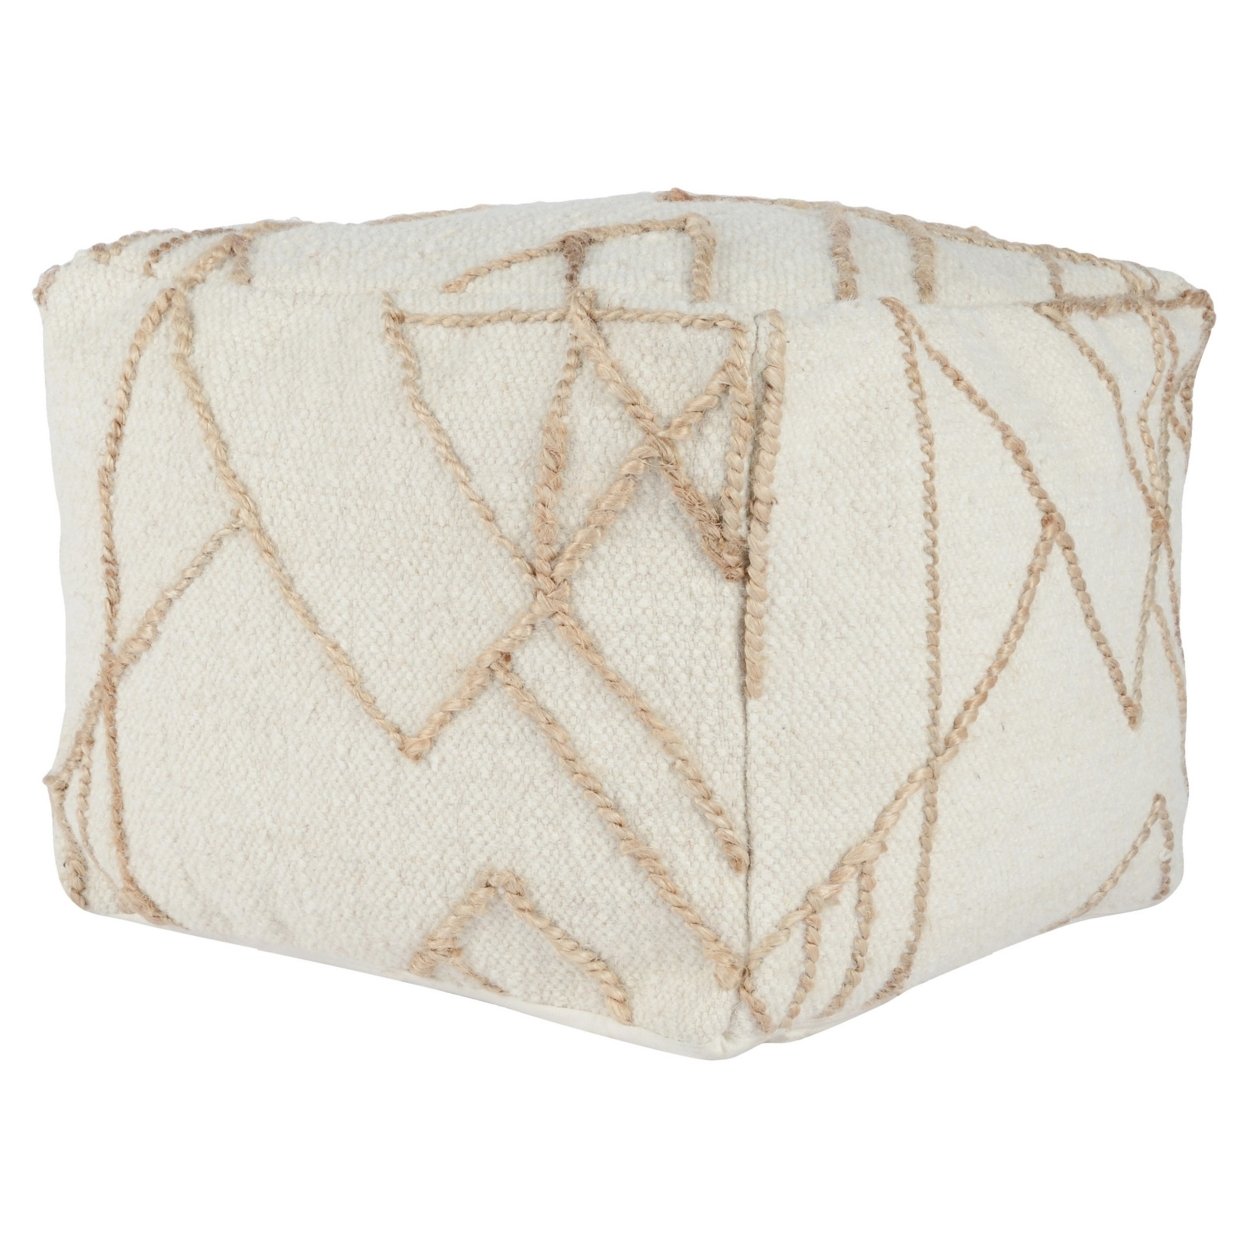 18 Inch Square Cube Accent Pouf, Woven Abstract Jute Embroidery, Off White, Saltoro Sherpi